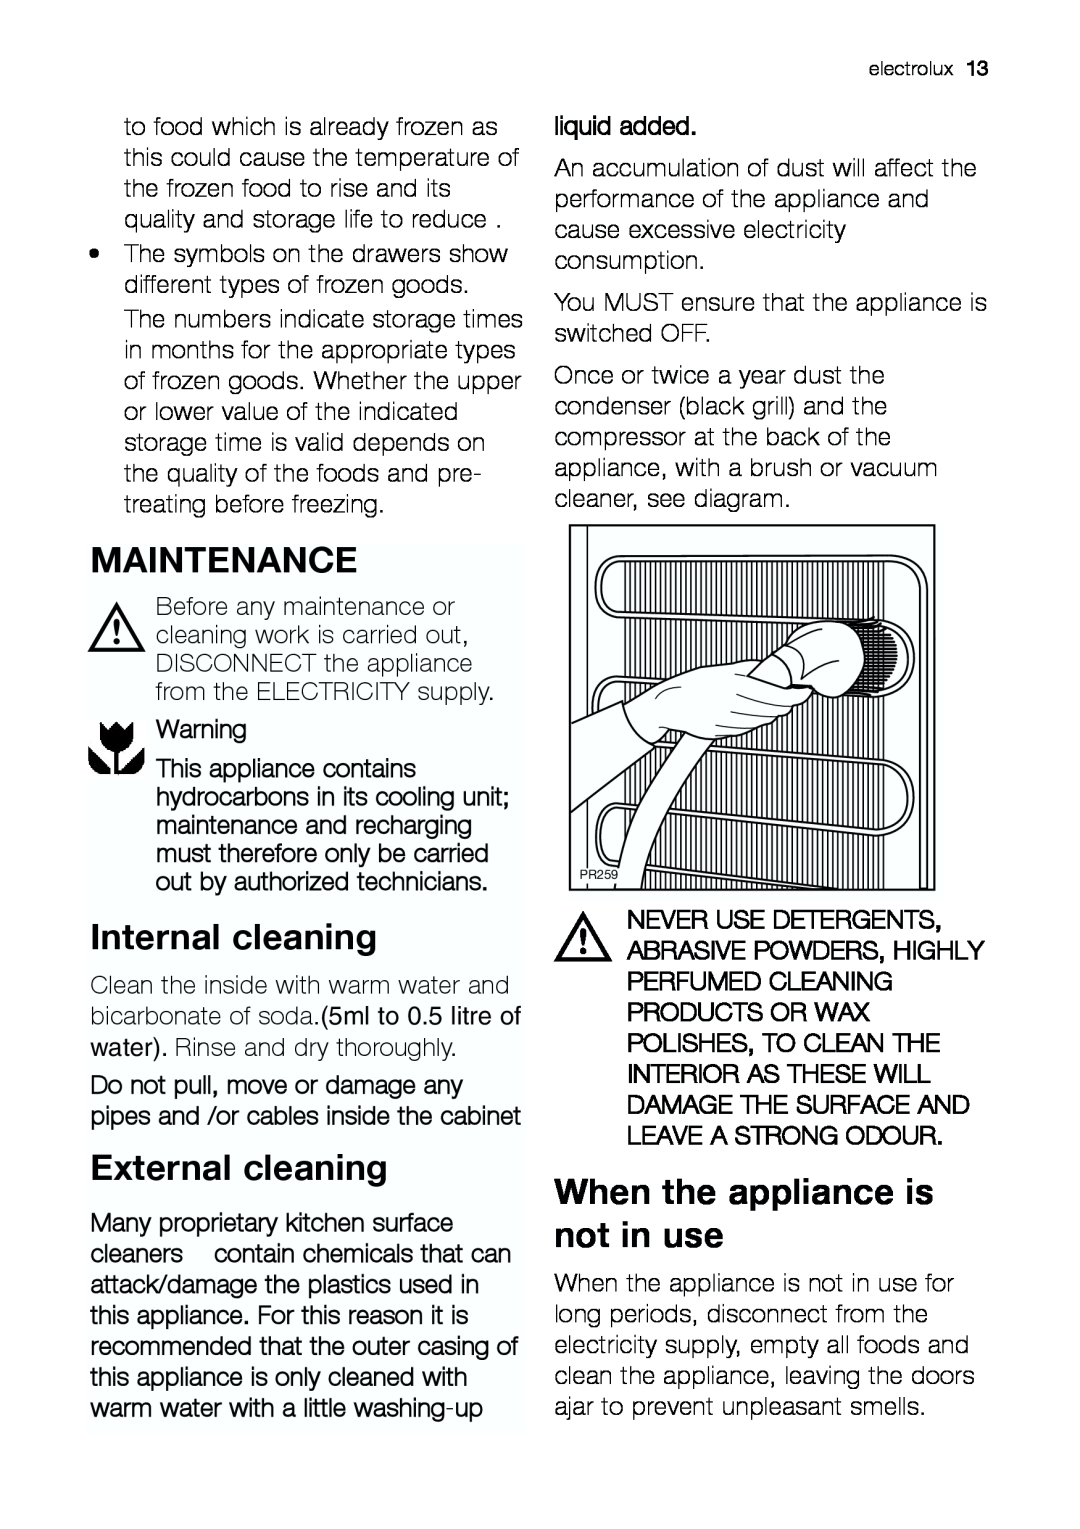 Electrolux EUF 27291 W Maintenance, Internal cleaning, External cleaning, When the appliance is not in use, liquid added 